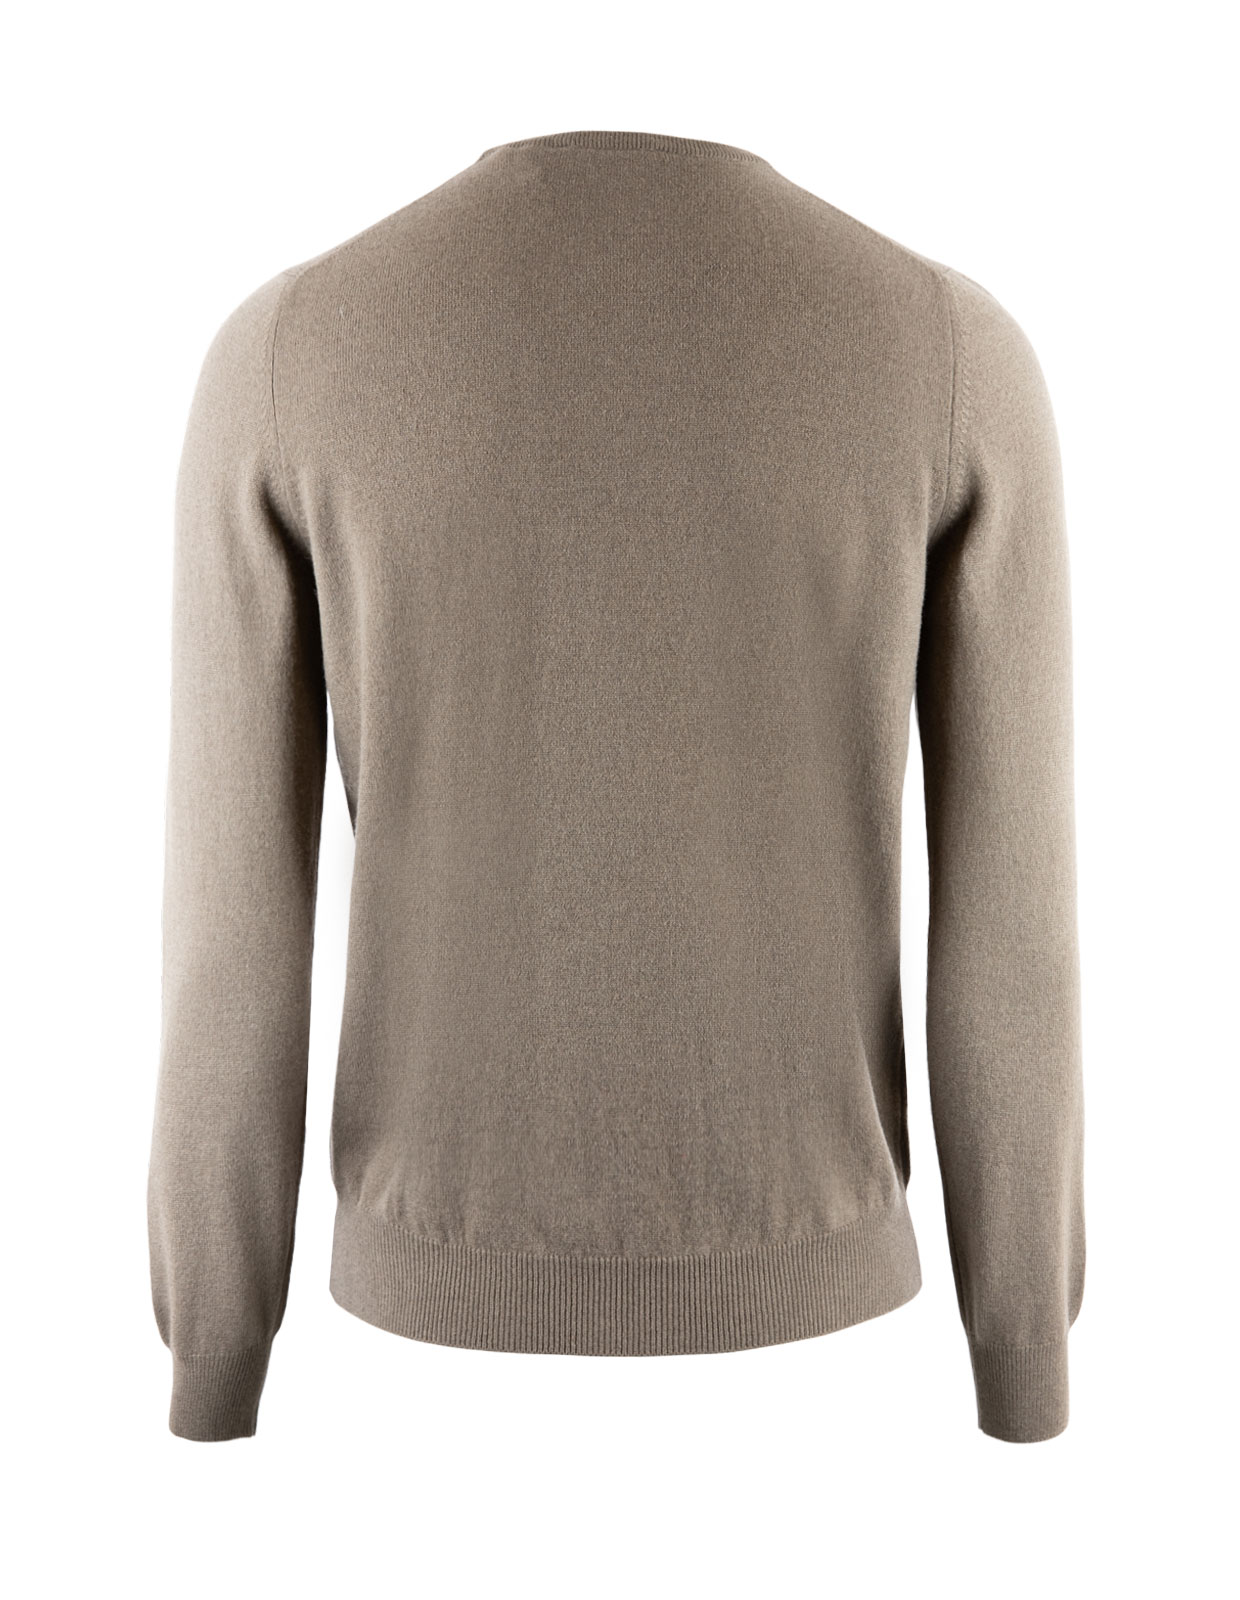 Crew Neck Wool & Cashmere Olive